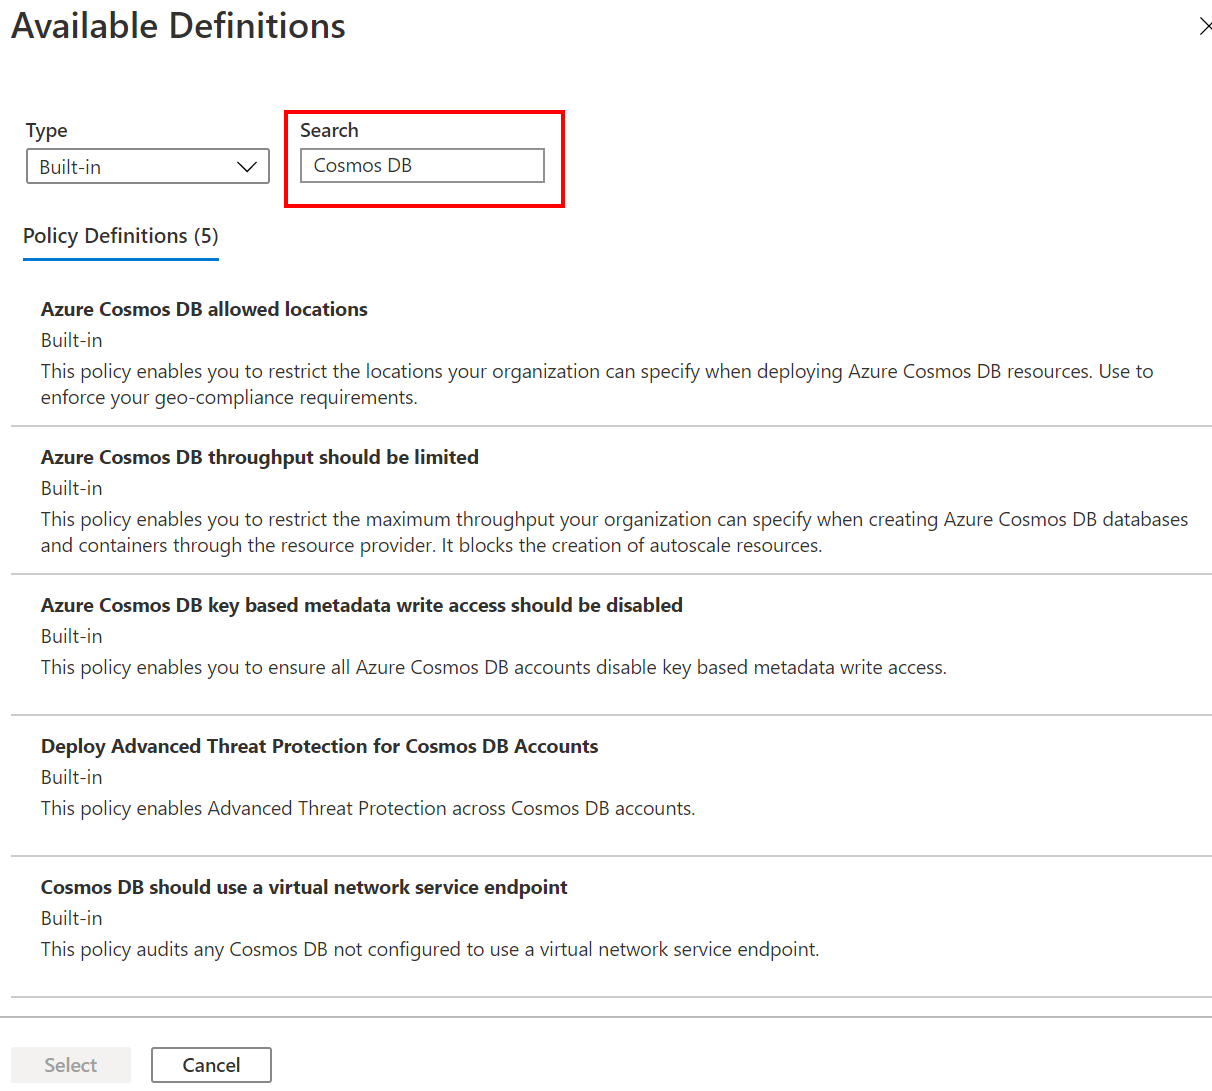 Search for Azure Cosmos DB built-in policy definitions